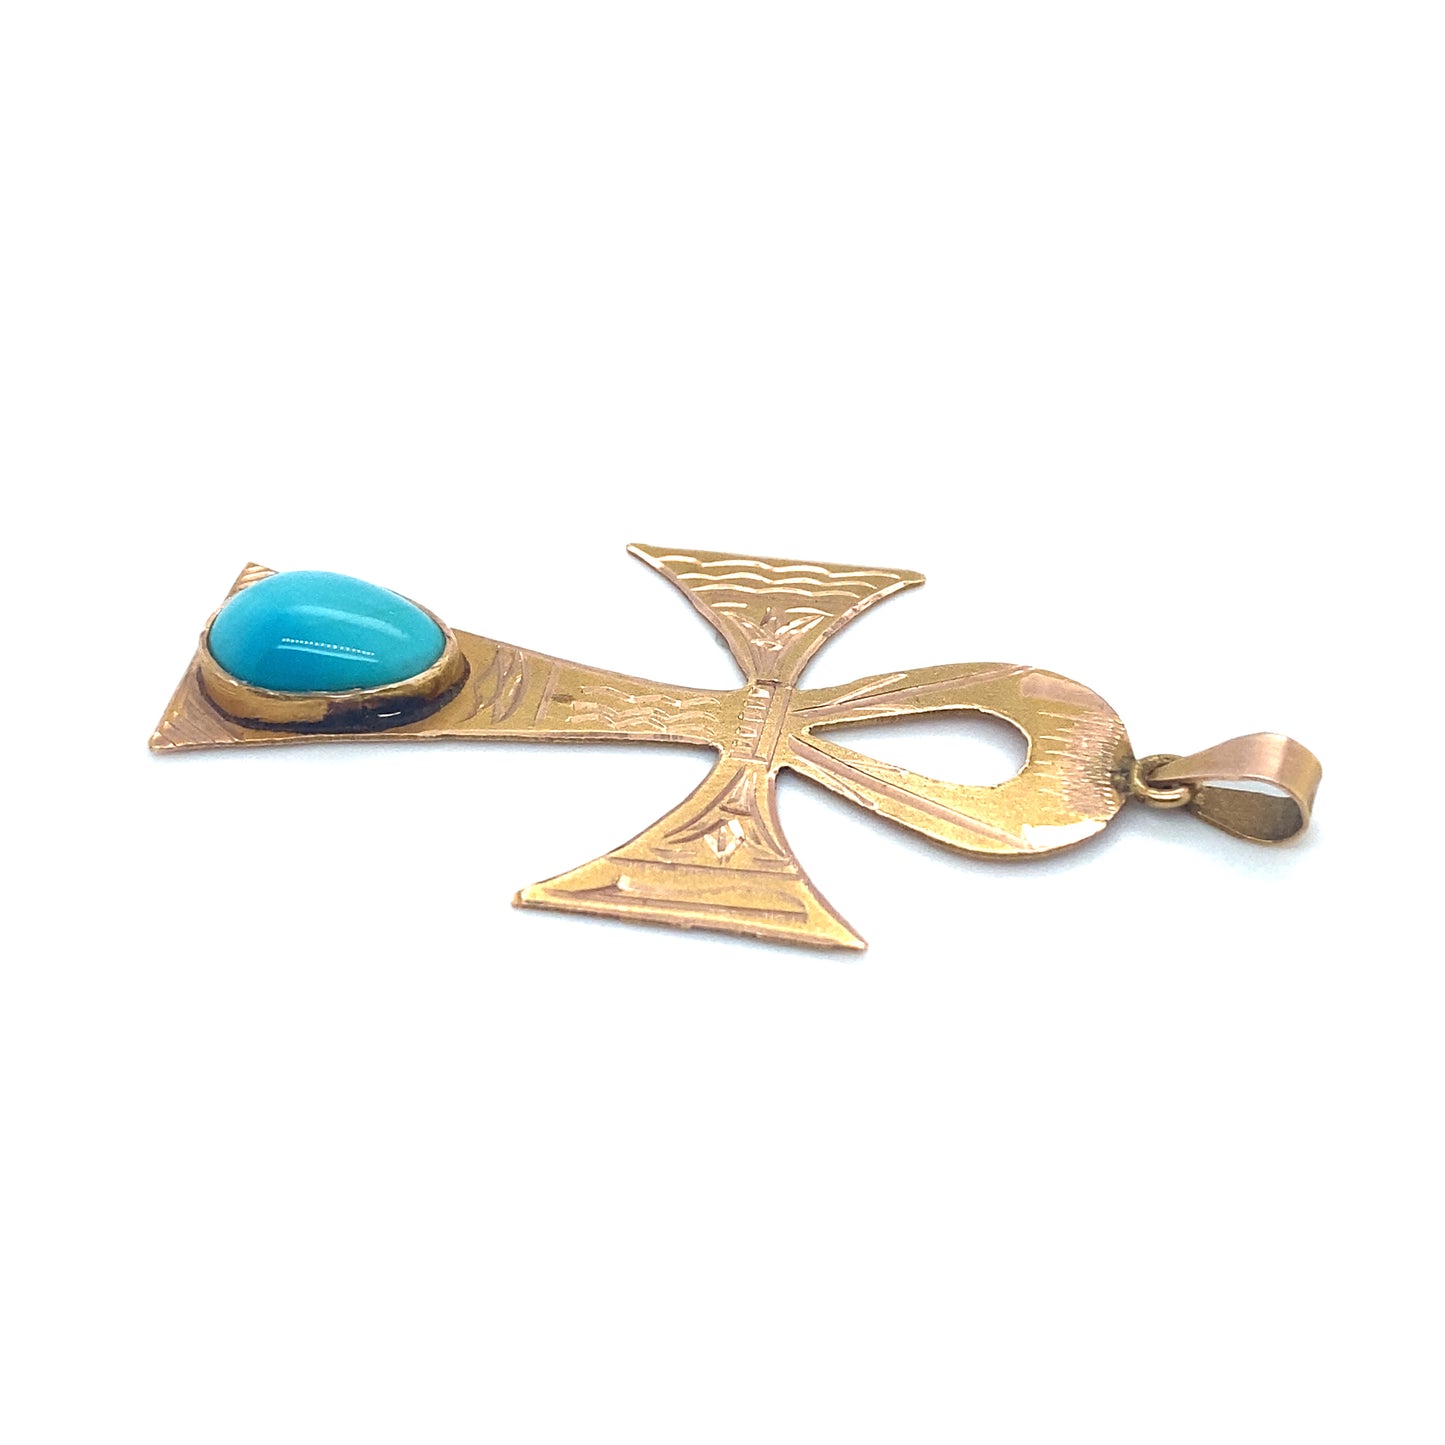 Circa 1970s Egyptian Ankh Turquoise Pendant in 18K Gold